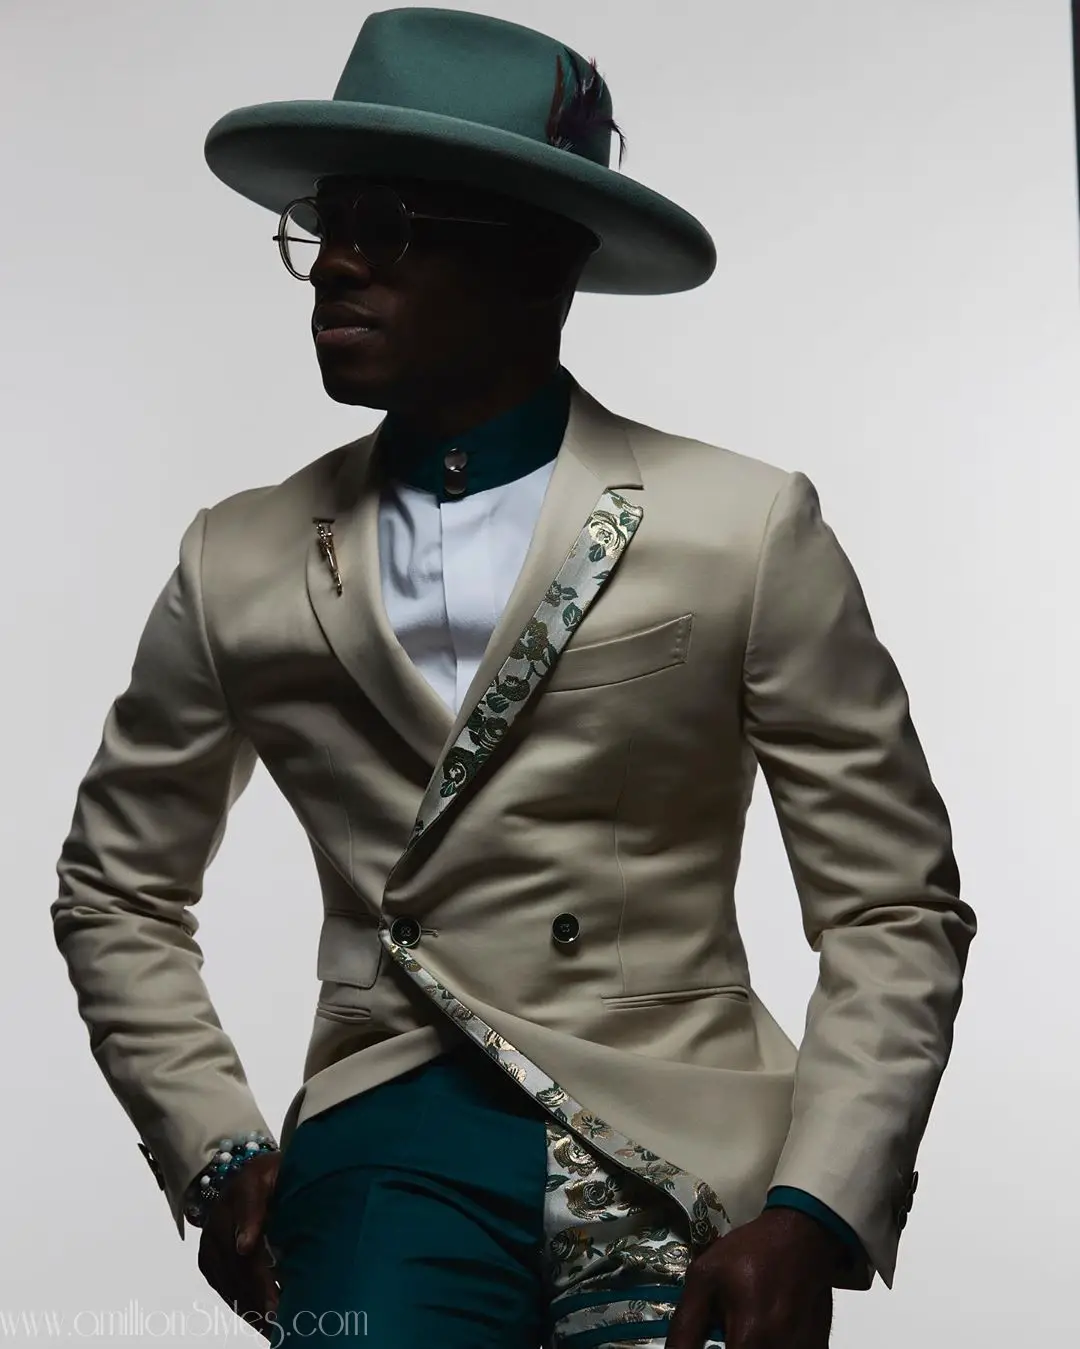 Garcon Couture Redefines Menswear With A Twist On Modern Looks